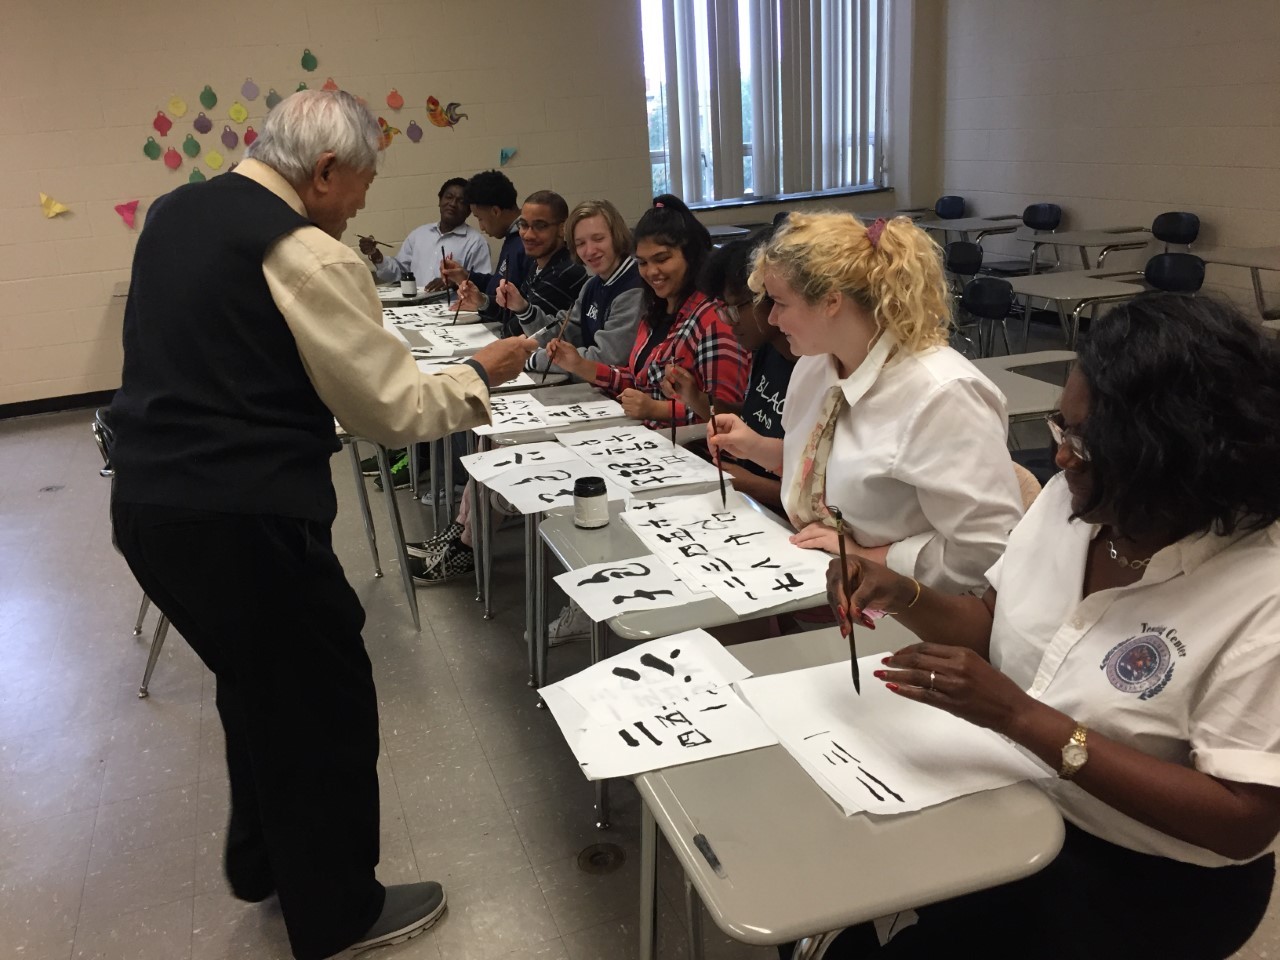 guest-speaker-mr-l-teaches-chinese-calligraphy-for-monthly-cultural